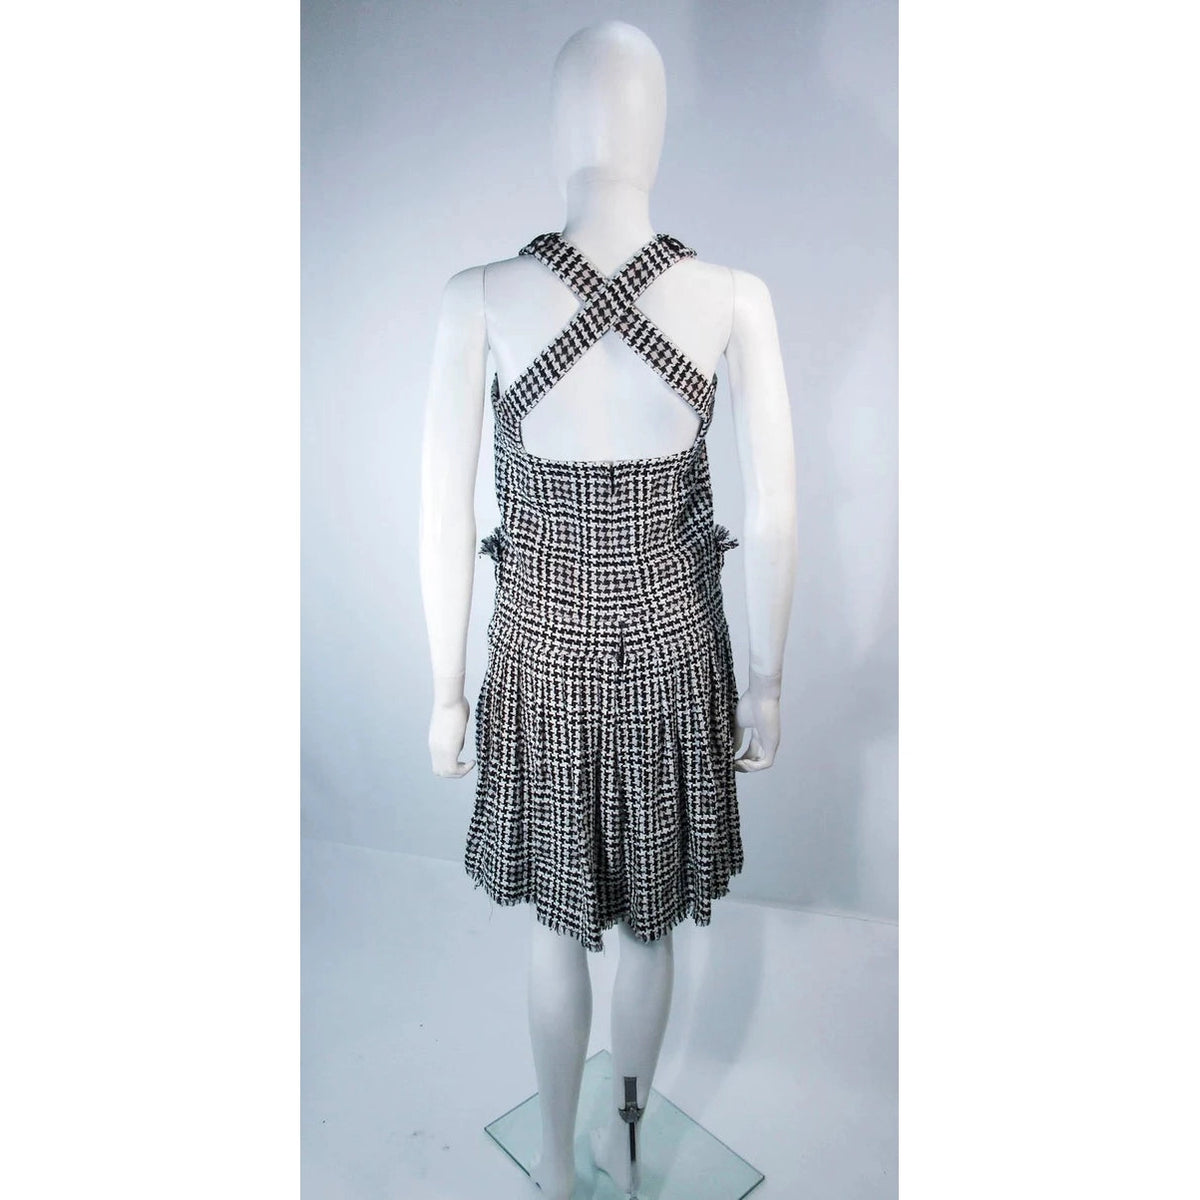 CHANEL Black and White Tweed Criss Cross Back Dress